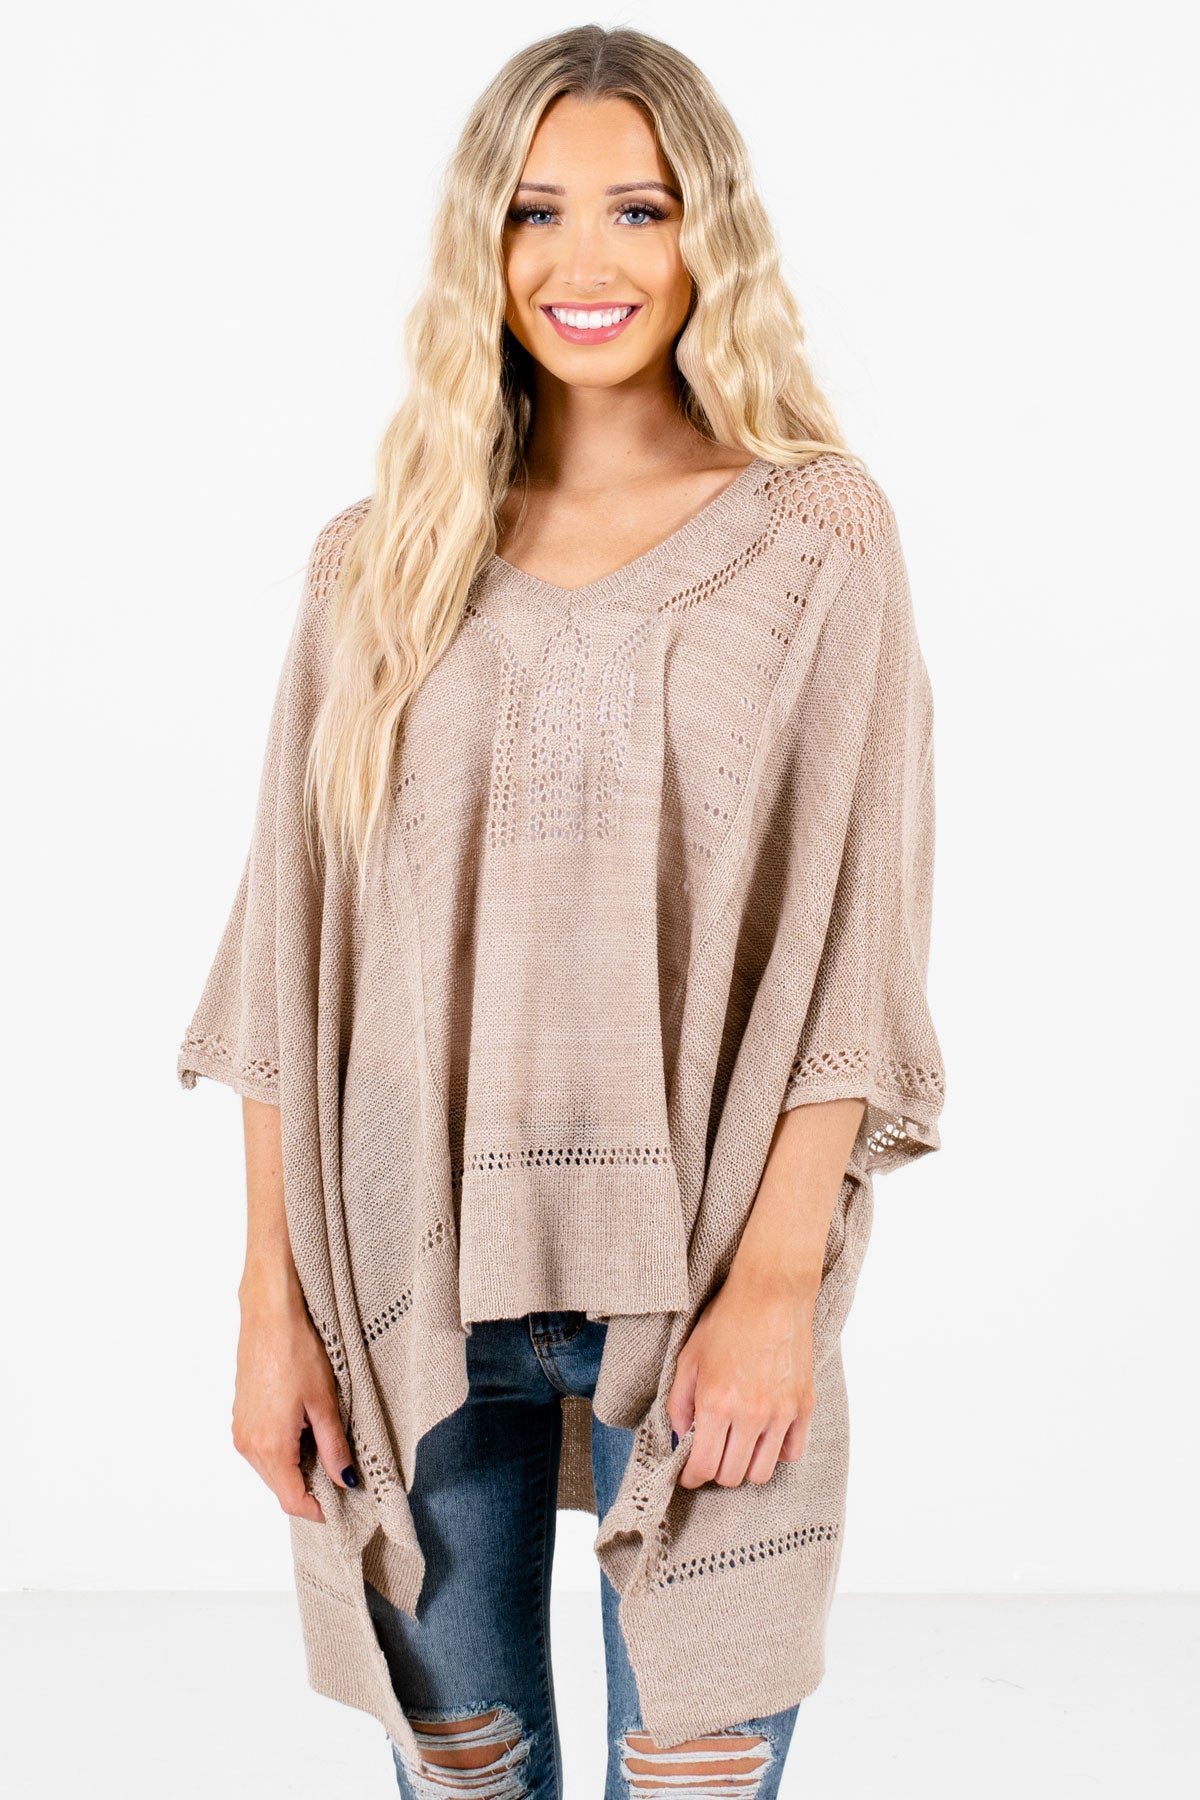 Taupe Brown Lightweight Knit Material Boutique Ponchos for Women